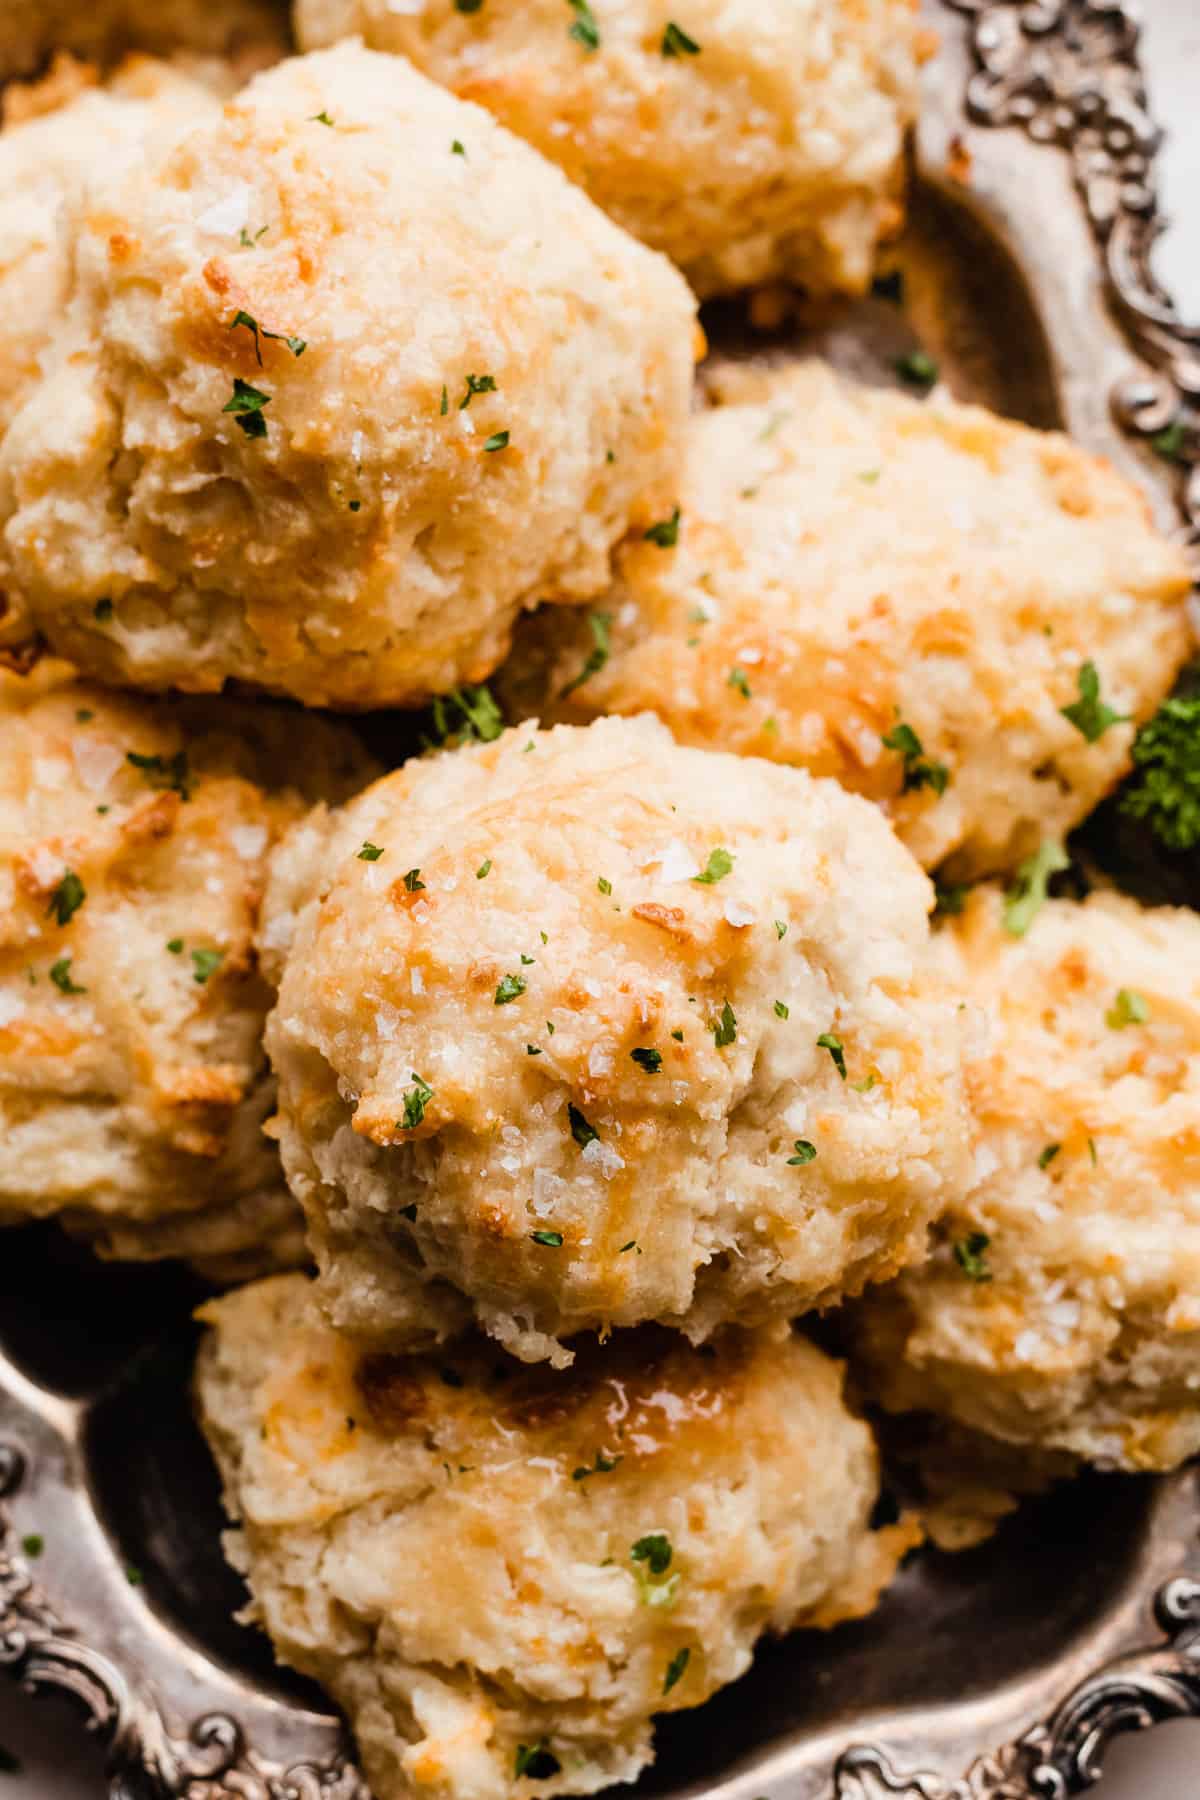 A close-up of the drop biscuits in a serving tray, brushed with melted butter and sprinkled with sea salt and parsley.